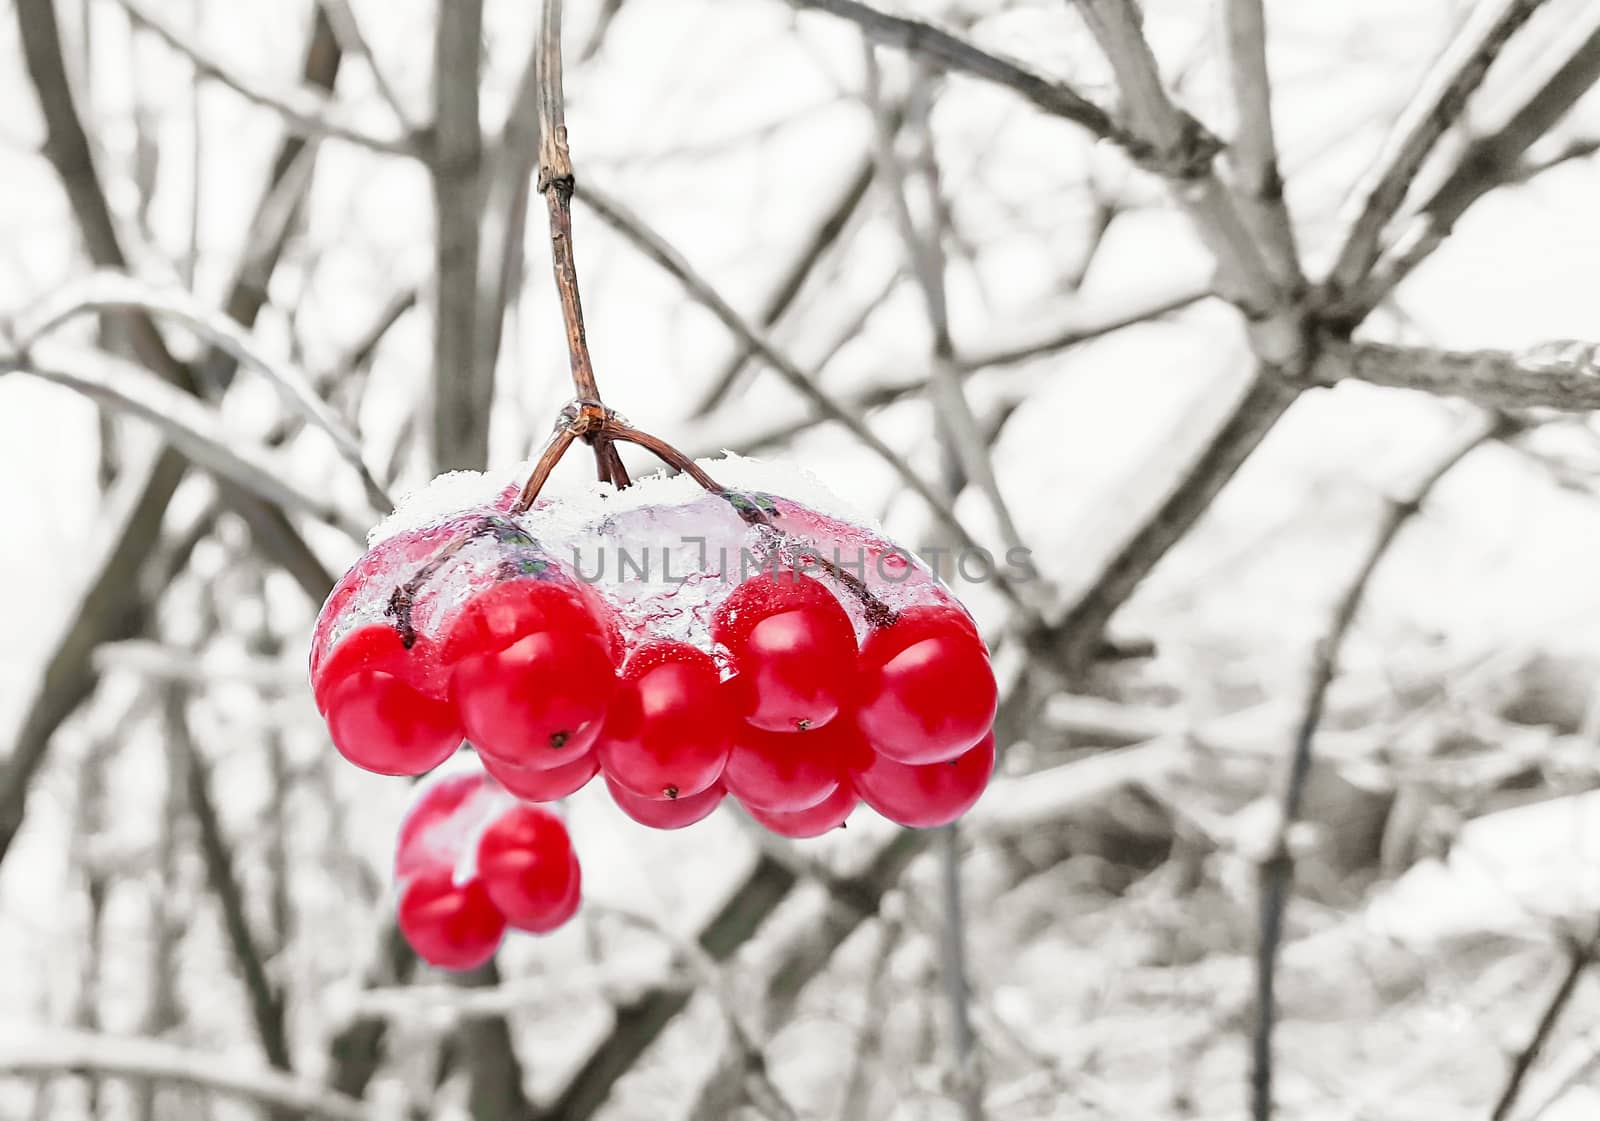 Viburnum branch with red berries in snow by zeffss